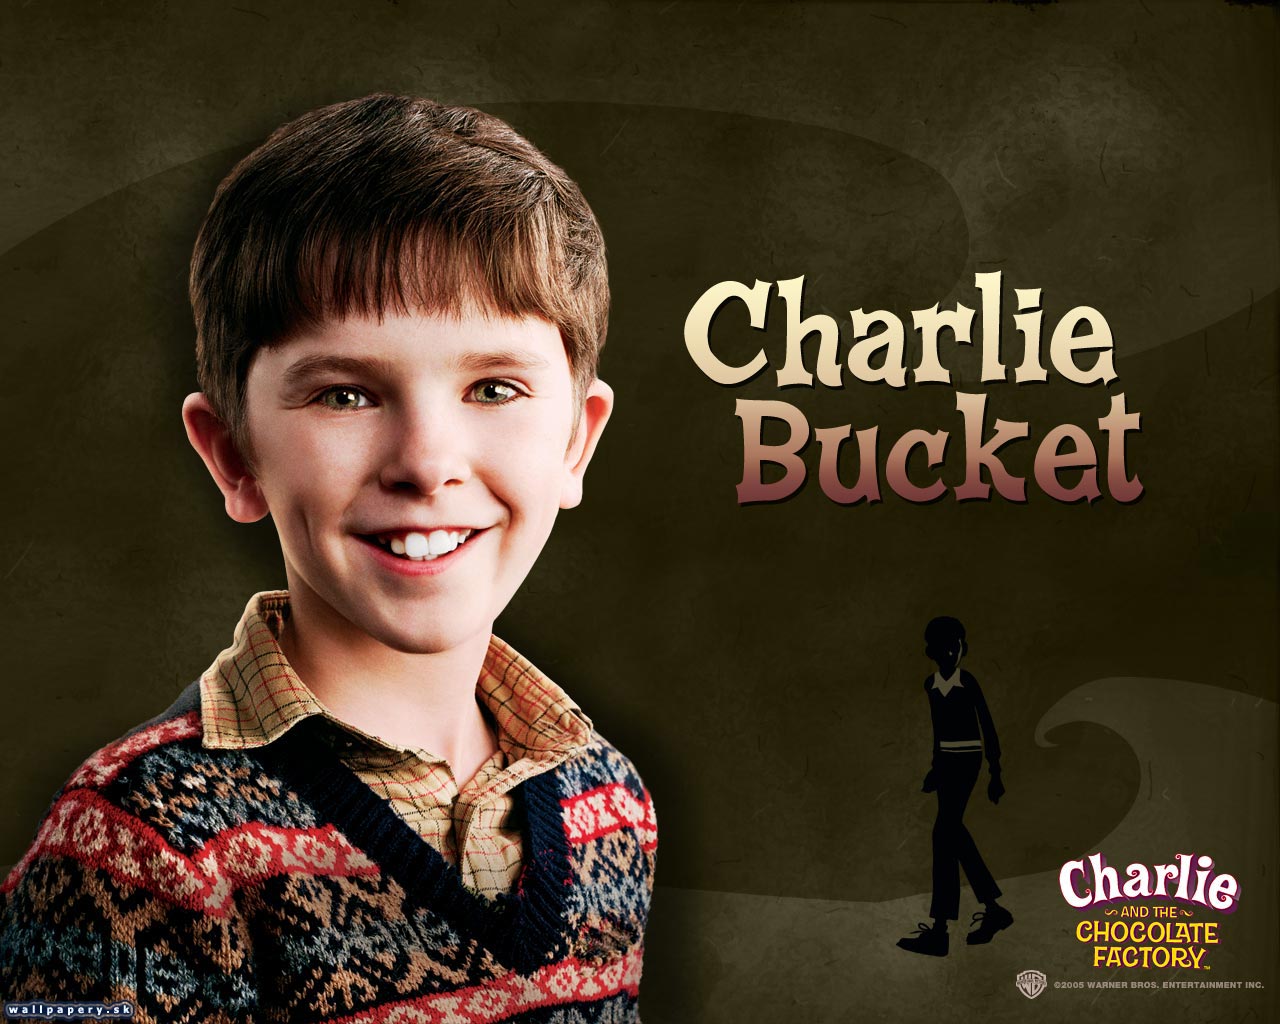 Charlie and the Chocolate Factory - wallpaper 2